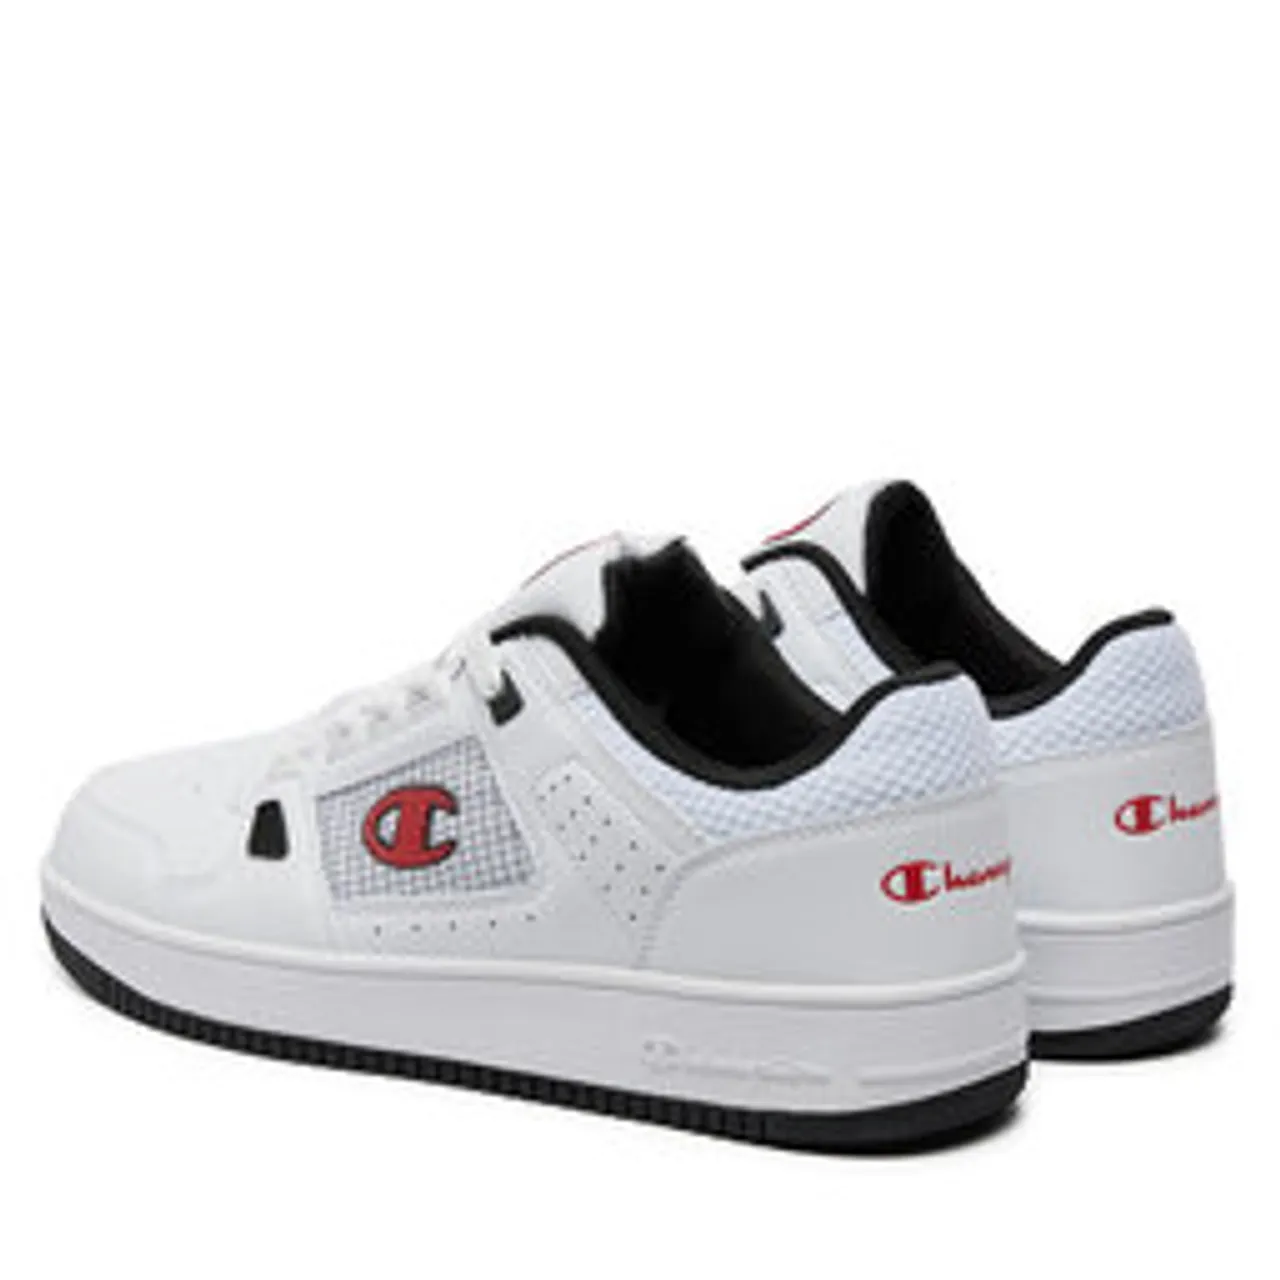 Sneakers Champion S22186-CHA-WW007 Wht/Nbk/Red